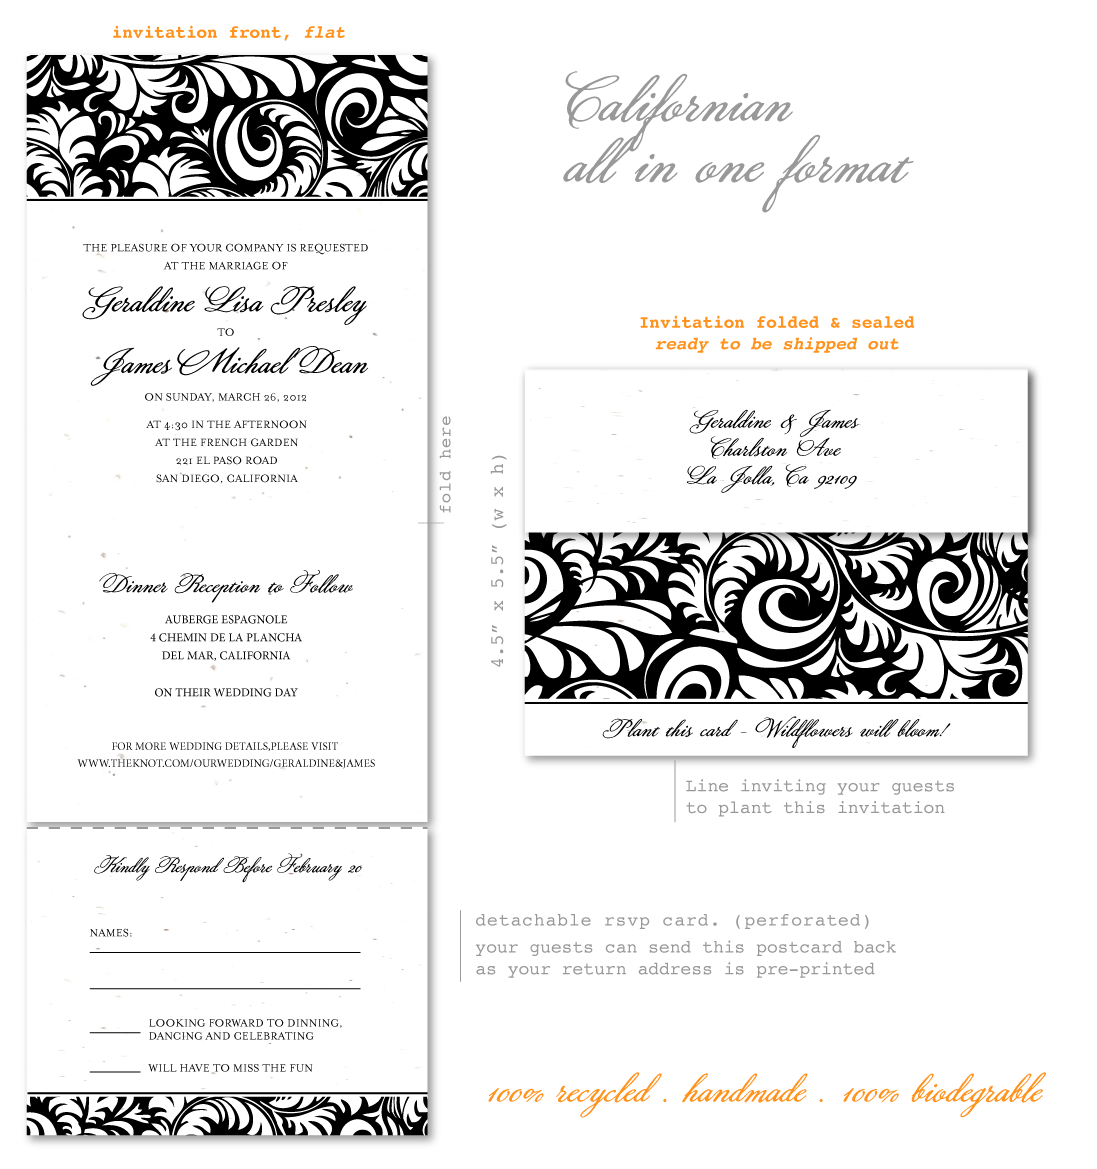 All in One Invitations for Weddings